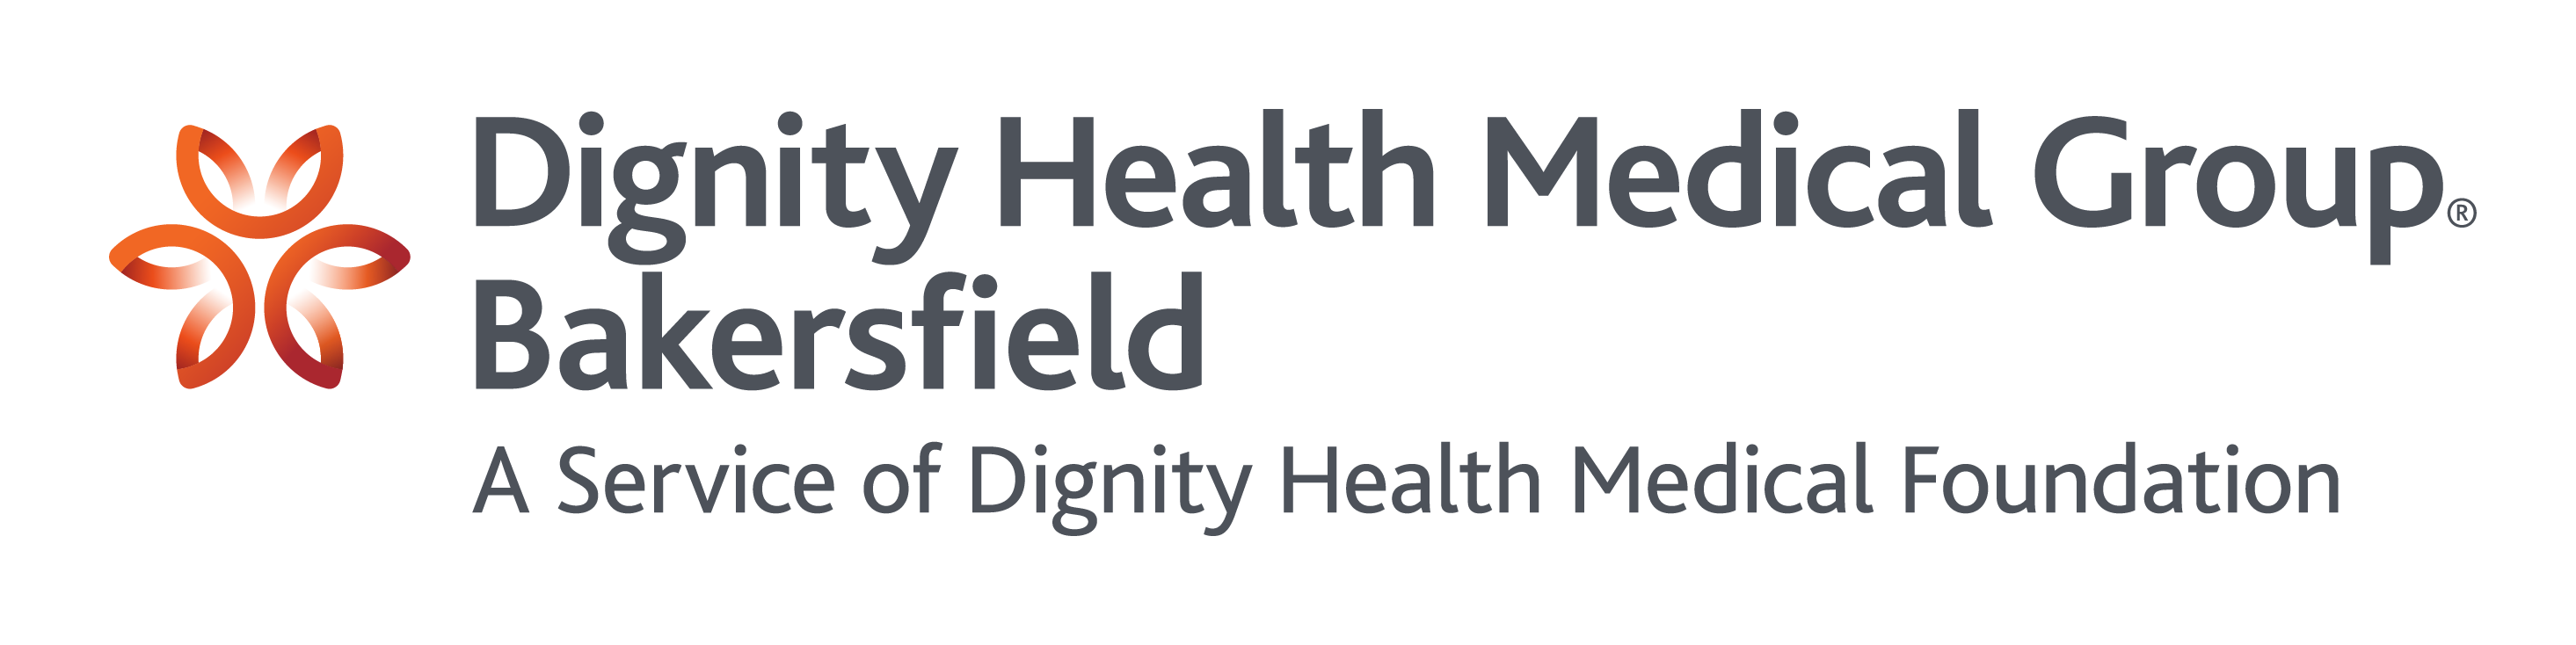 Dignity Health Medical Group - Bakersfield